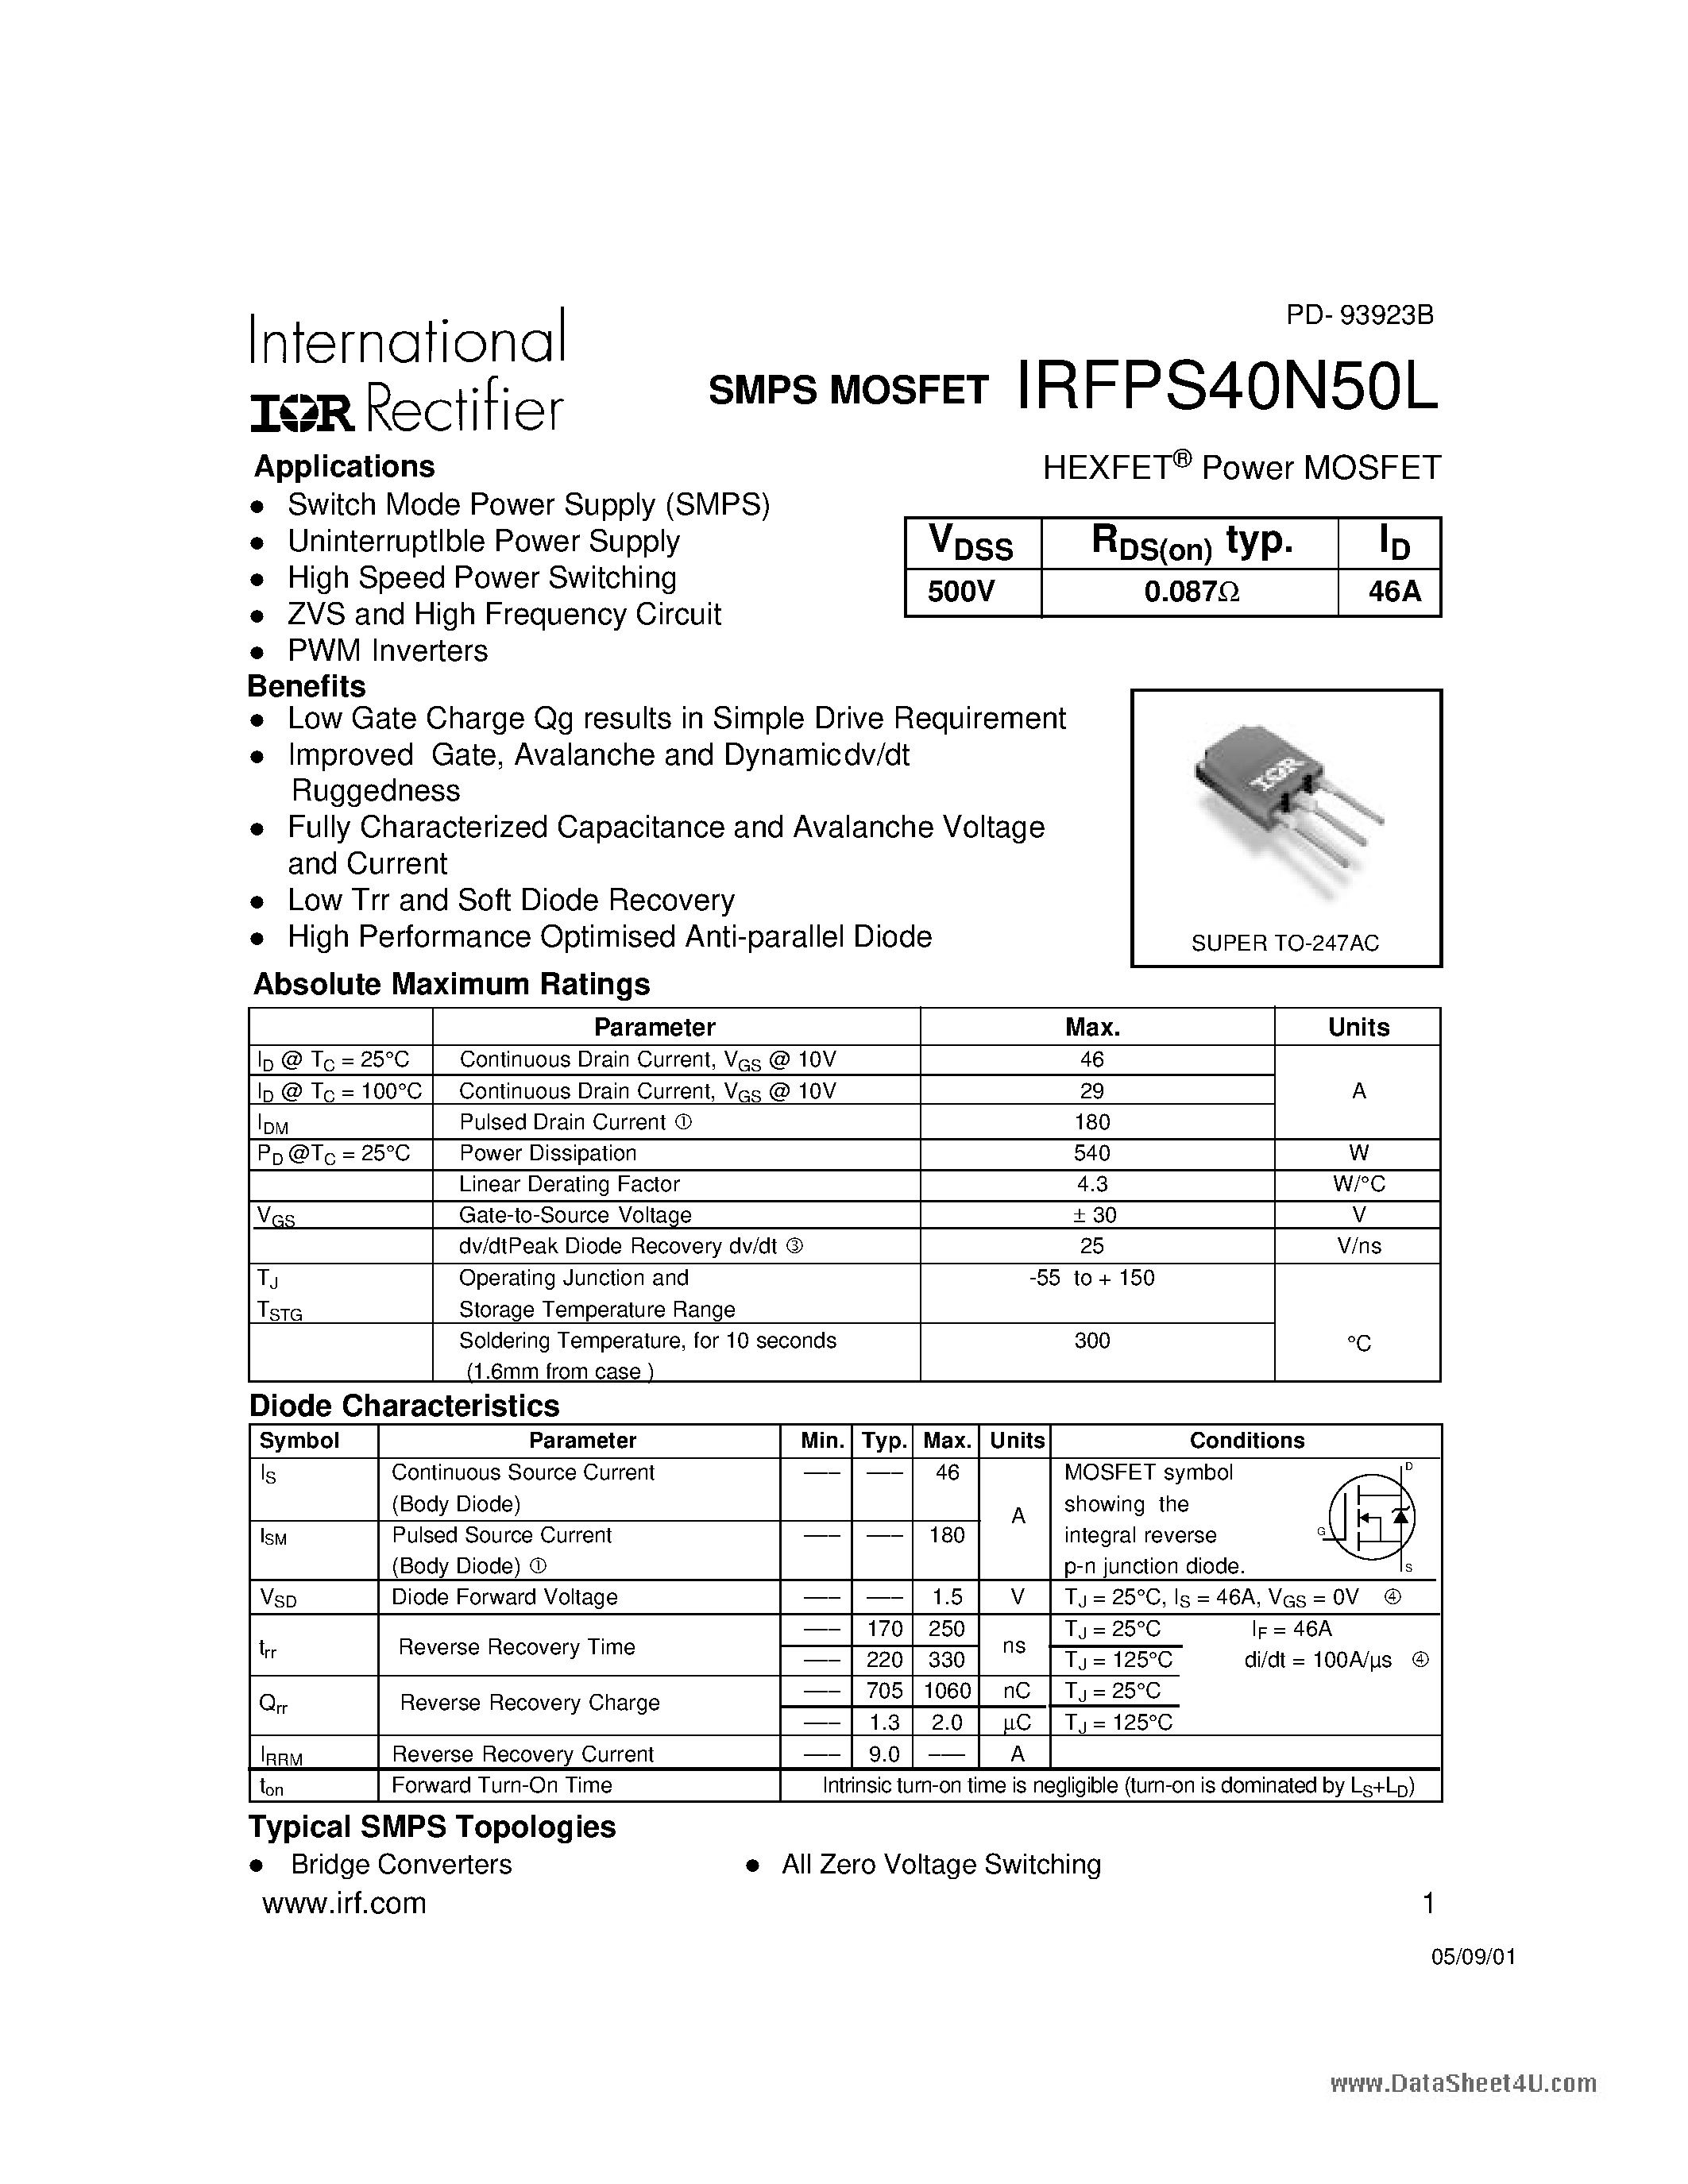 Даташит IRFPS40N50L - HEXFET Power MOSFET страница 1